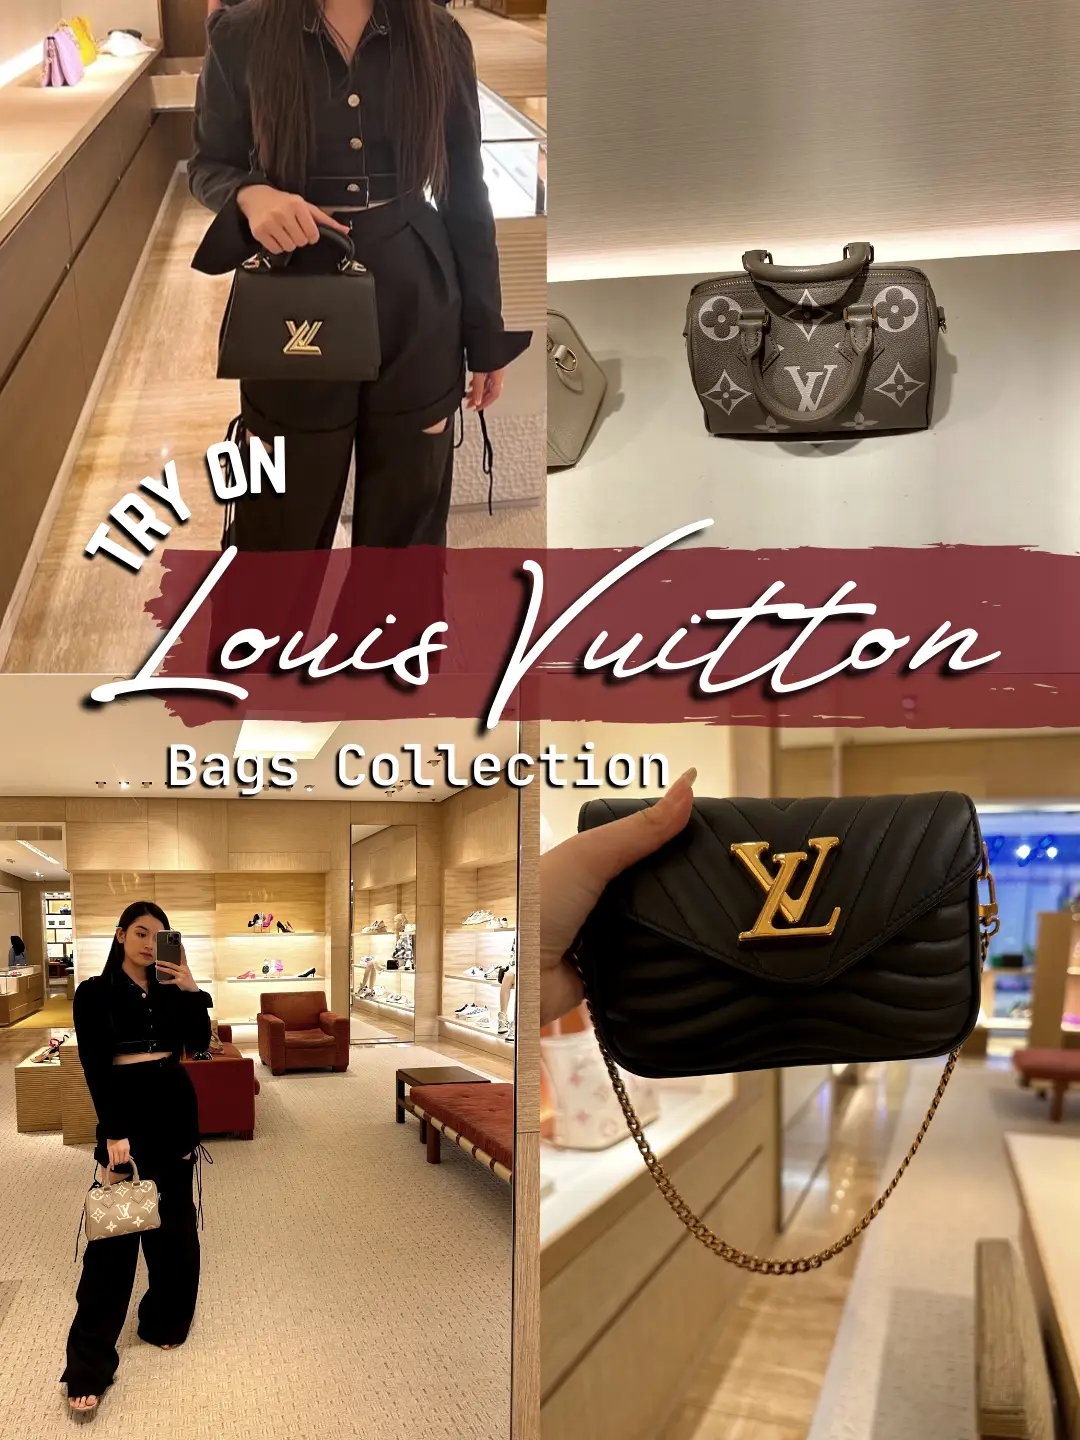 Try on Louis Vuitton Bag 💼, Gallery posted by Regienashael